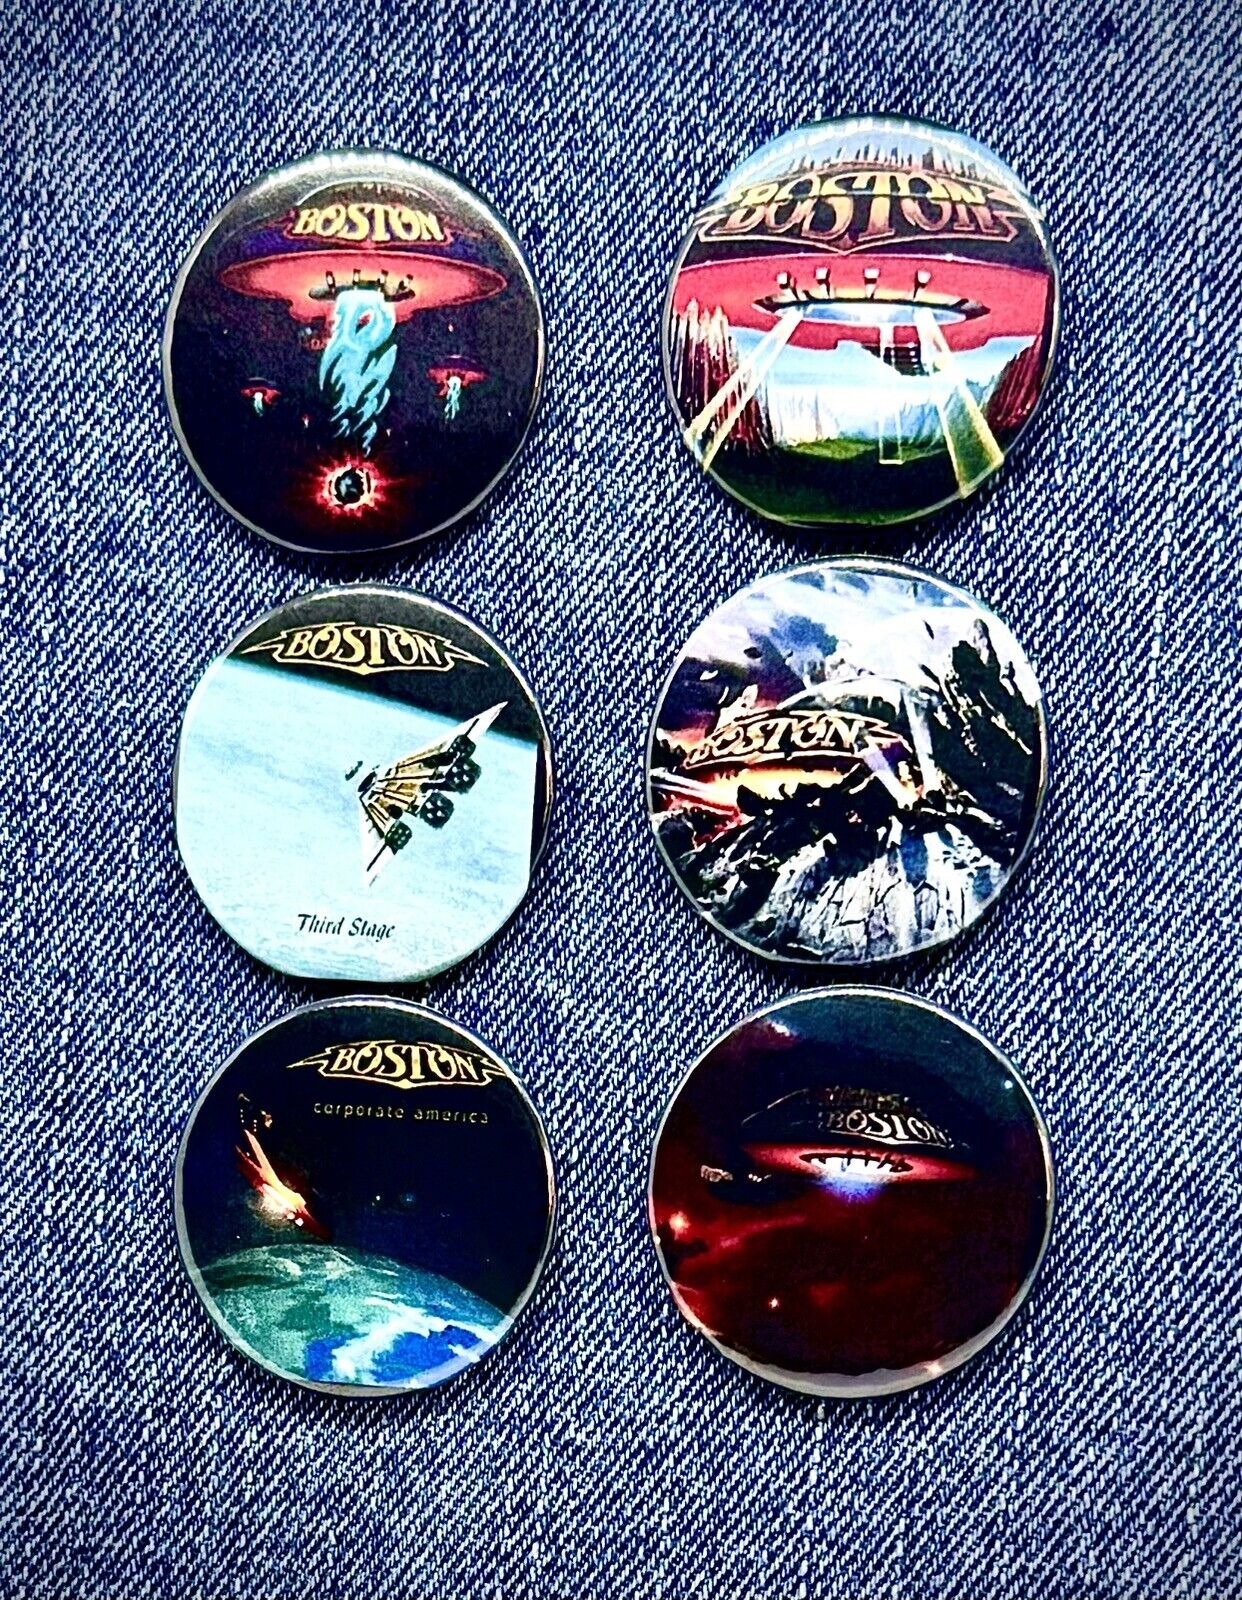 Boston “The First 5” Album Covers 1.5” Pin Back Buttons W/ Chase